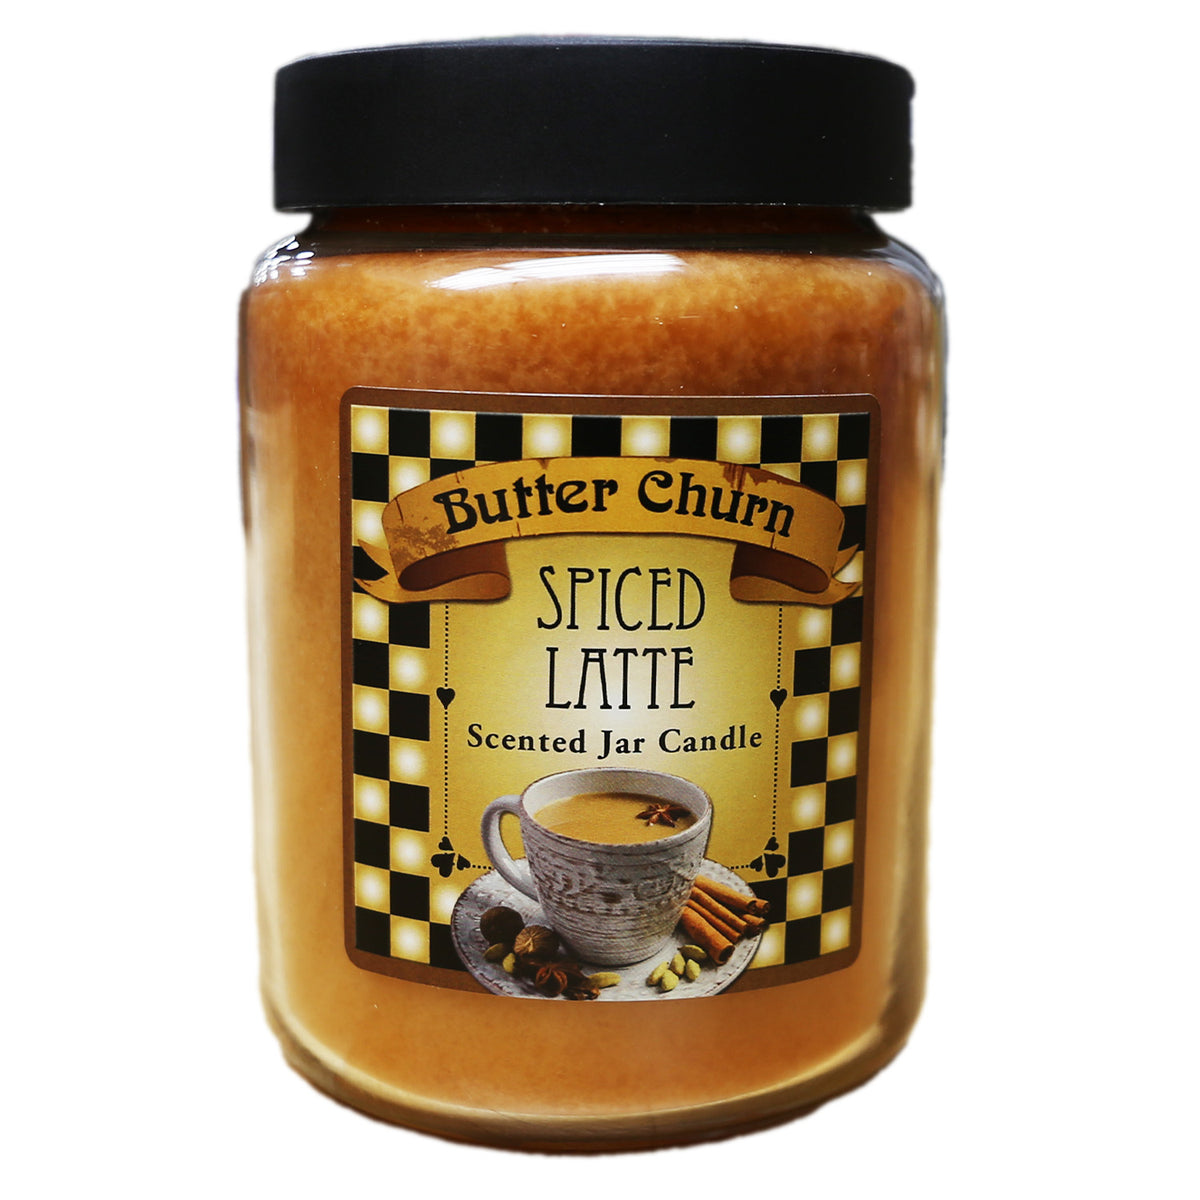 Butter Churn Candle - Spiced Latte 26 oz – Walnut Creek Cheese